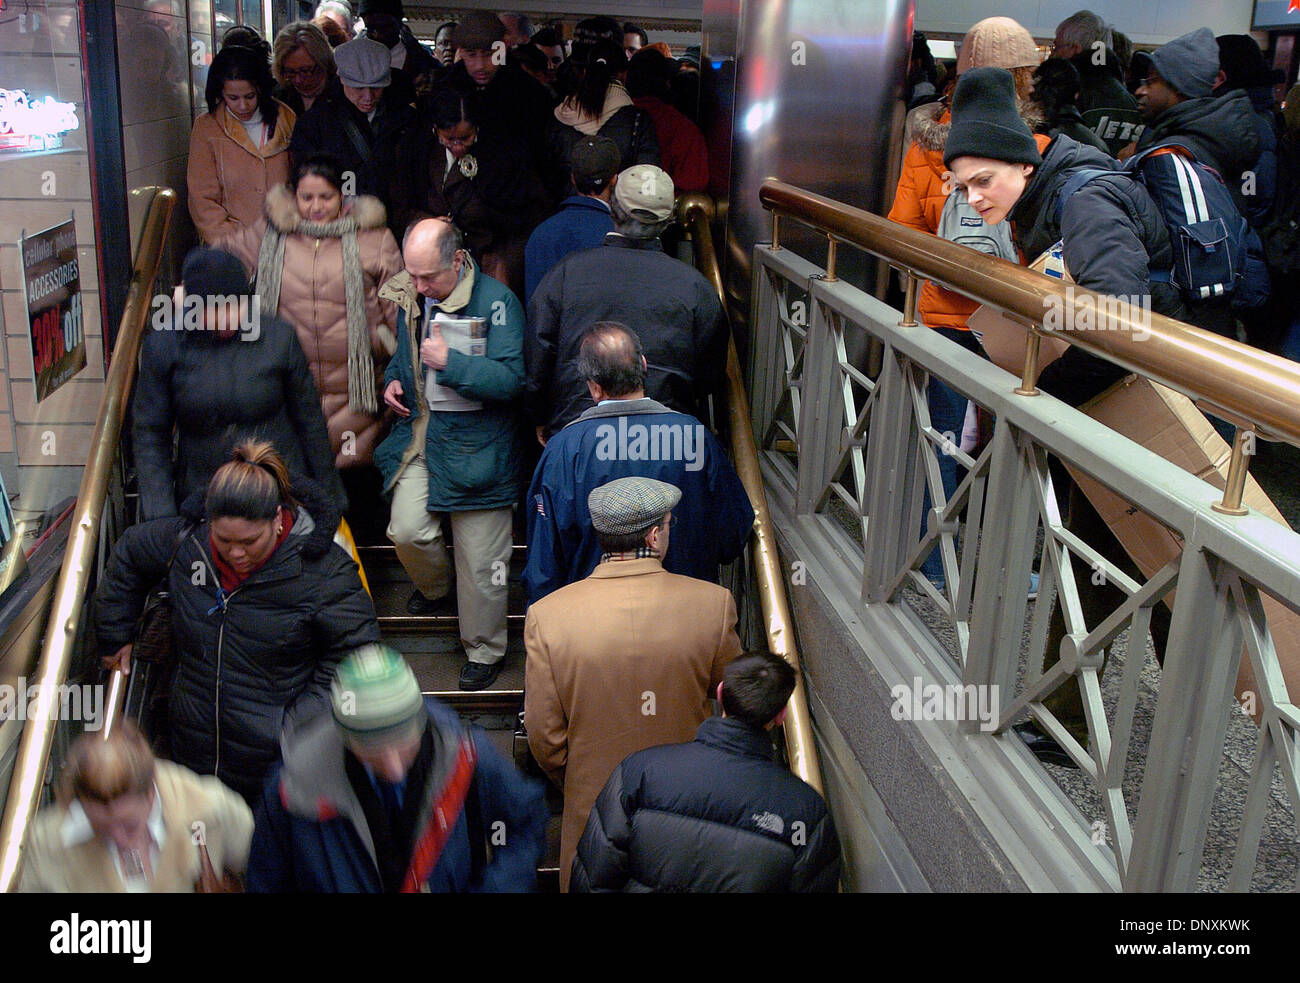 Dec 21, 2005; Manhattan, New York, USA; Commuters make their way down to the train platform at the Long Island Rail Road Terminal in Penn Station on the second day of the transit strike. Unable to reach an agreement with the Metropolitan Transportation Authority, NYC's 33,000 transit workers represented by Transport Workers Union Local 100 President Roger Toussaint walked off the j Stock Photo